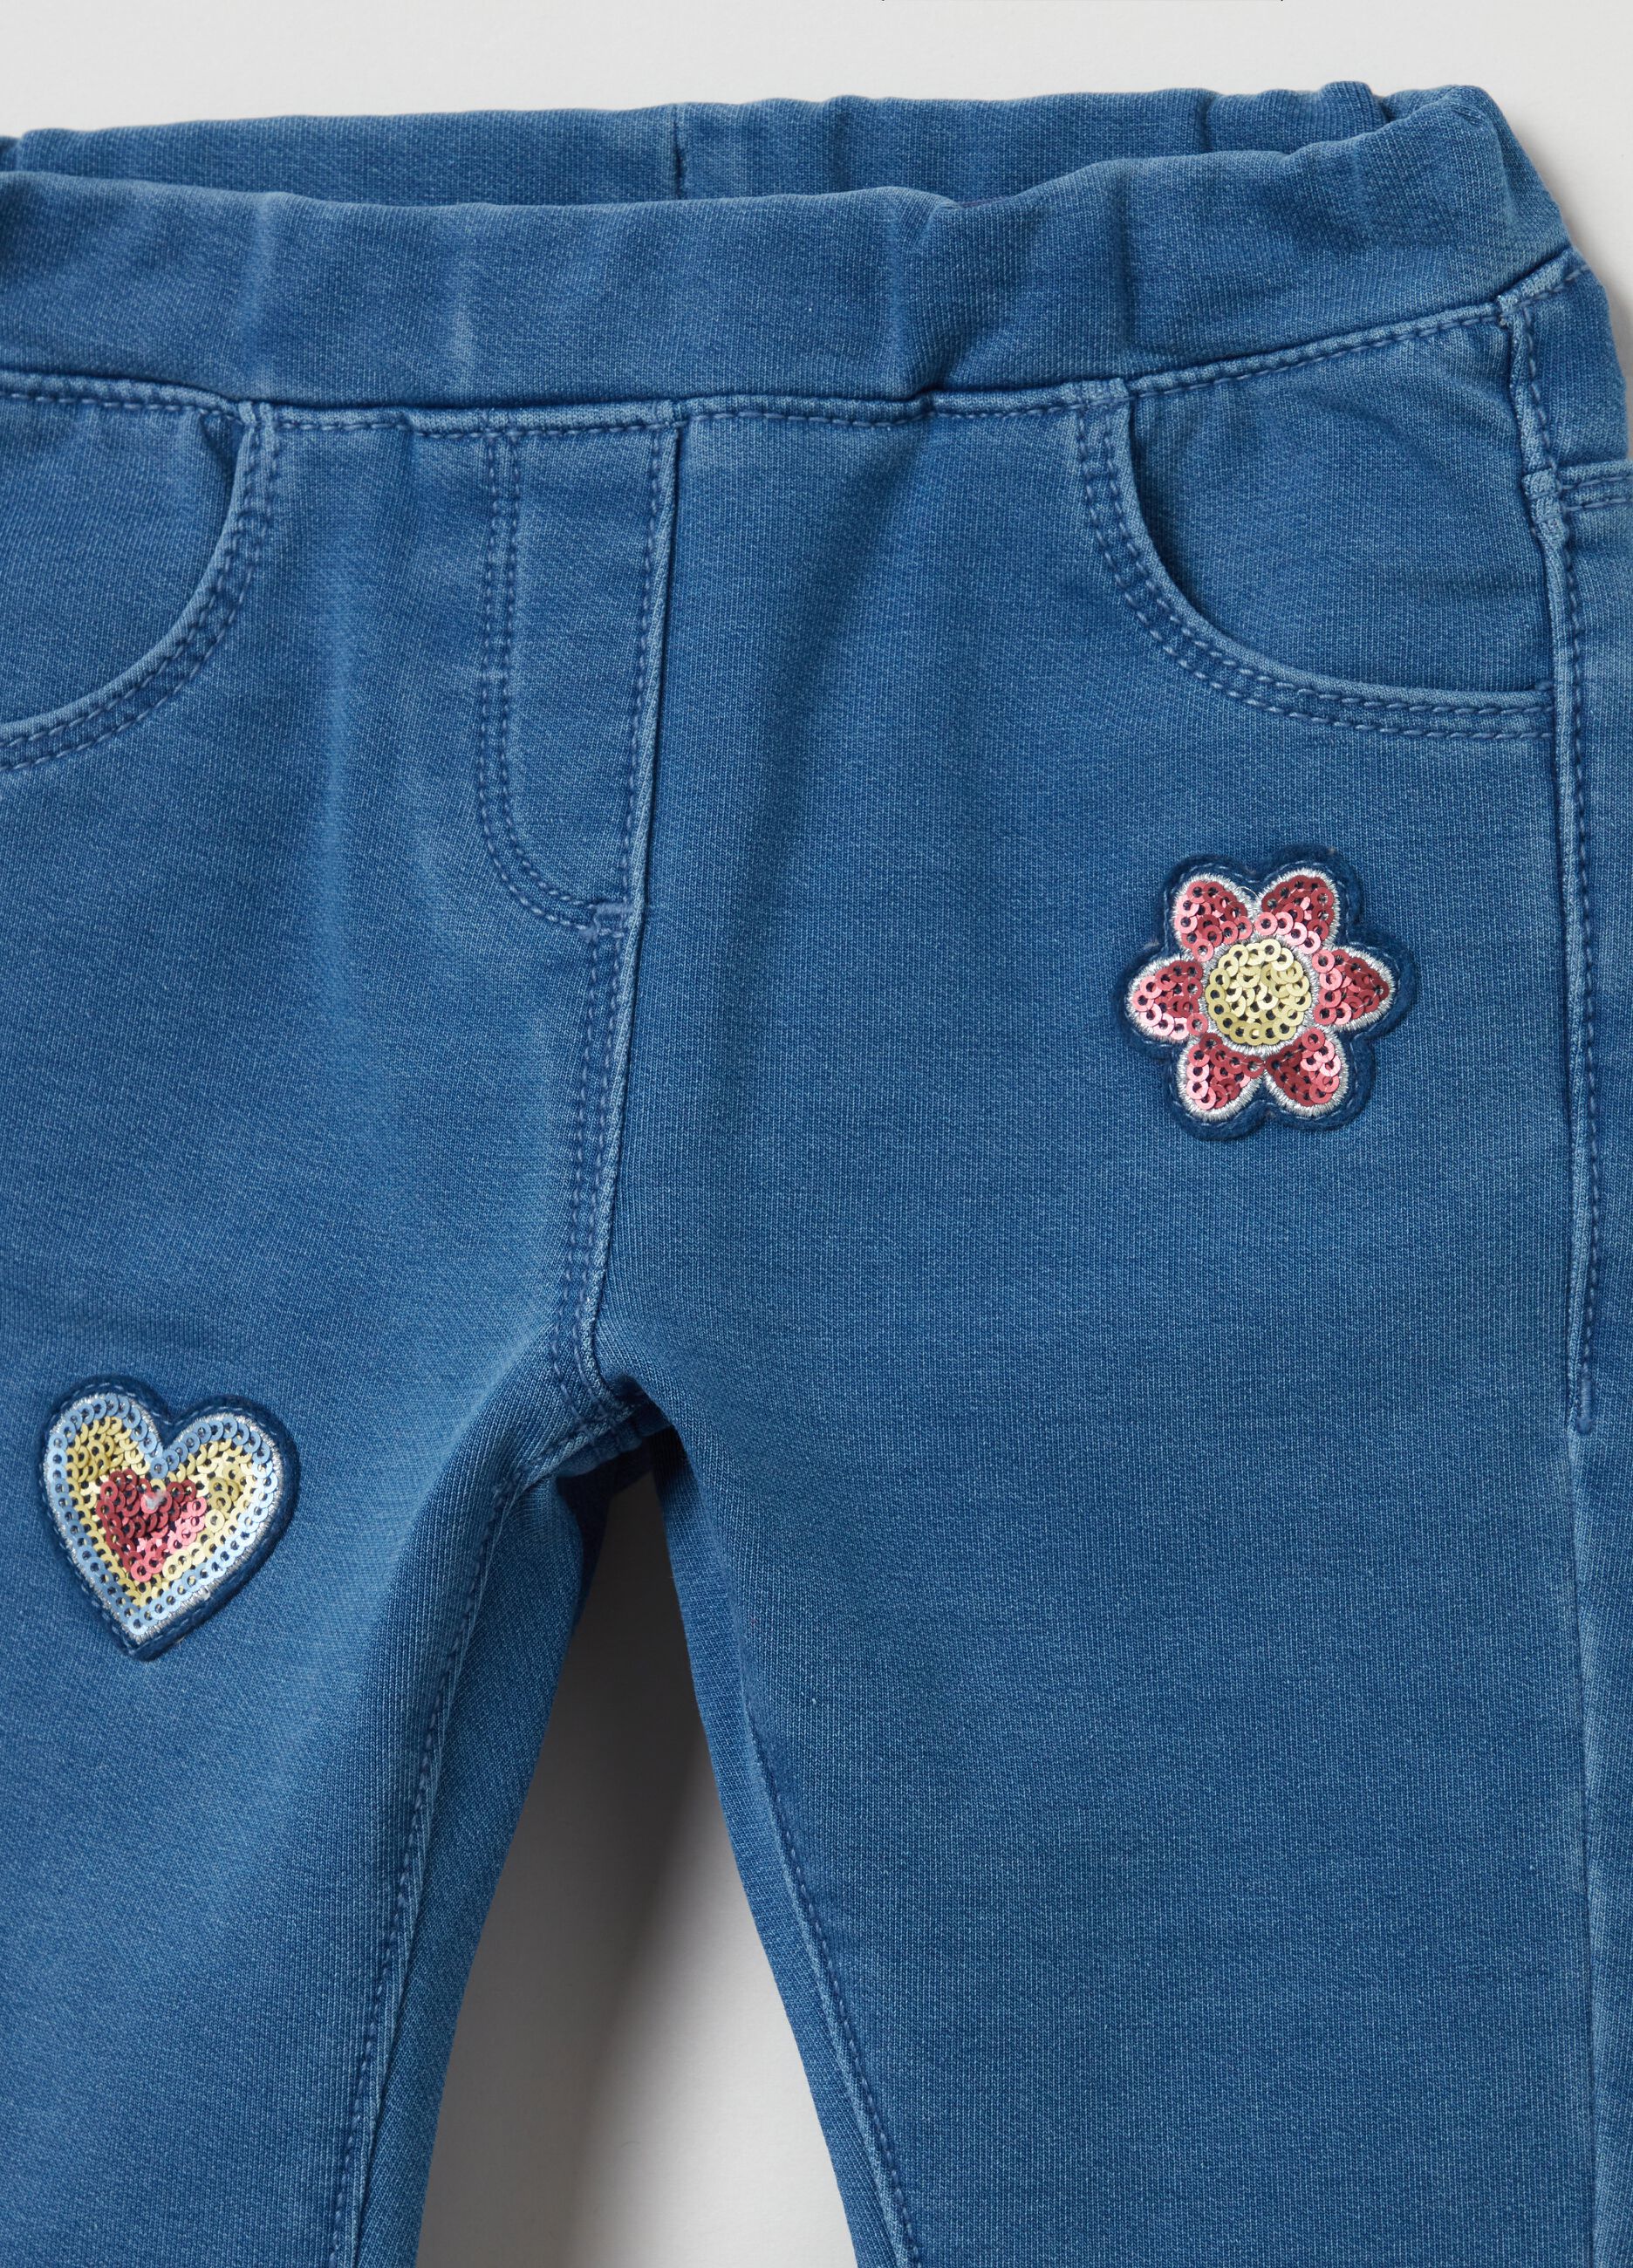 Jeggings with heart and flower patches